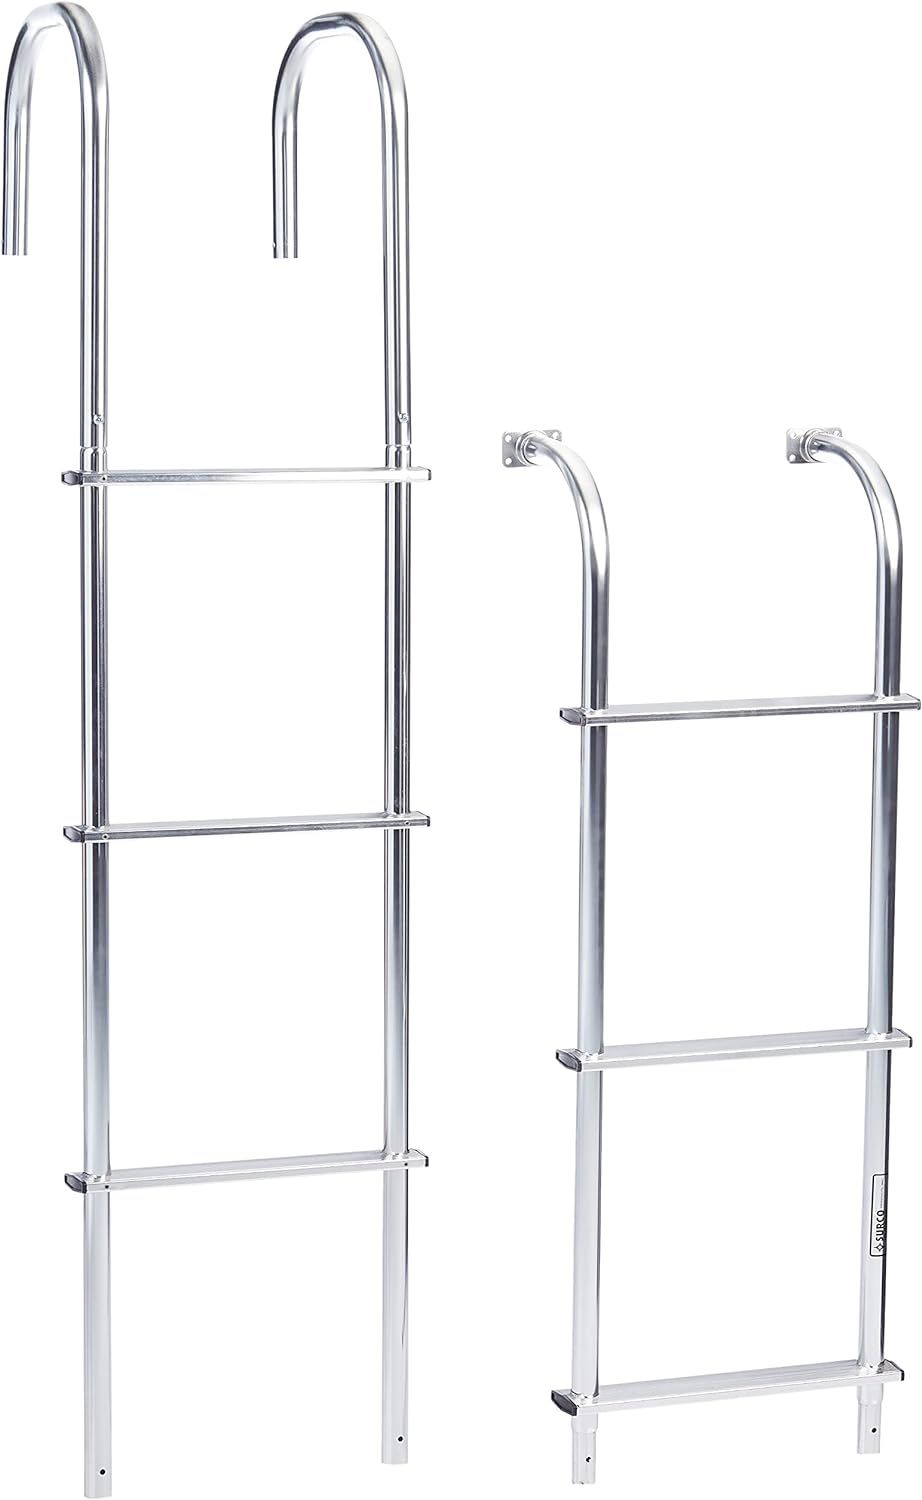 Surco Products 502L Universal RV Ladder - Straight